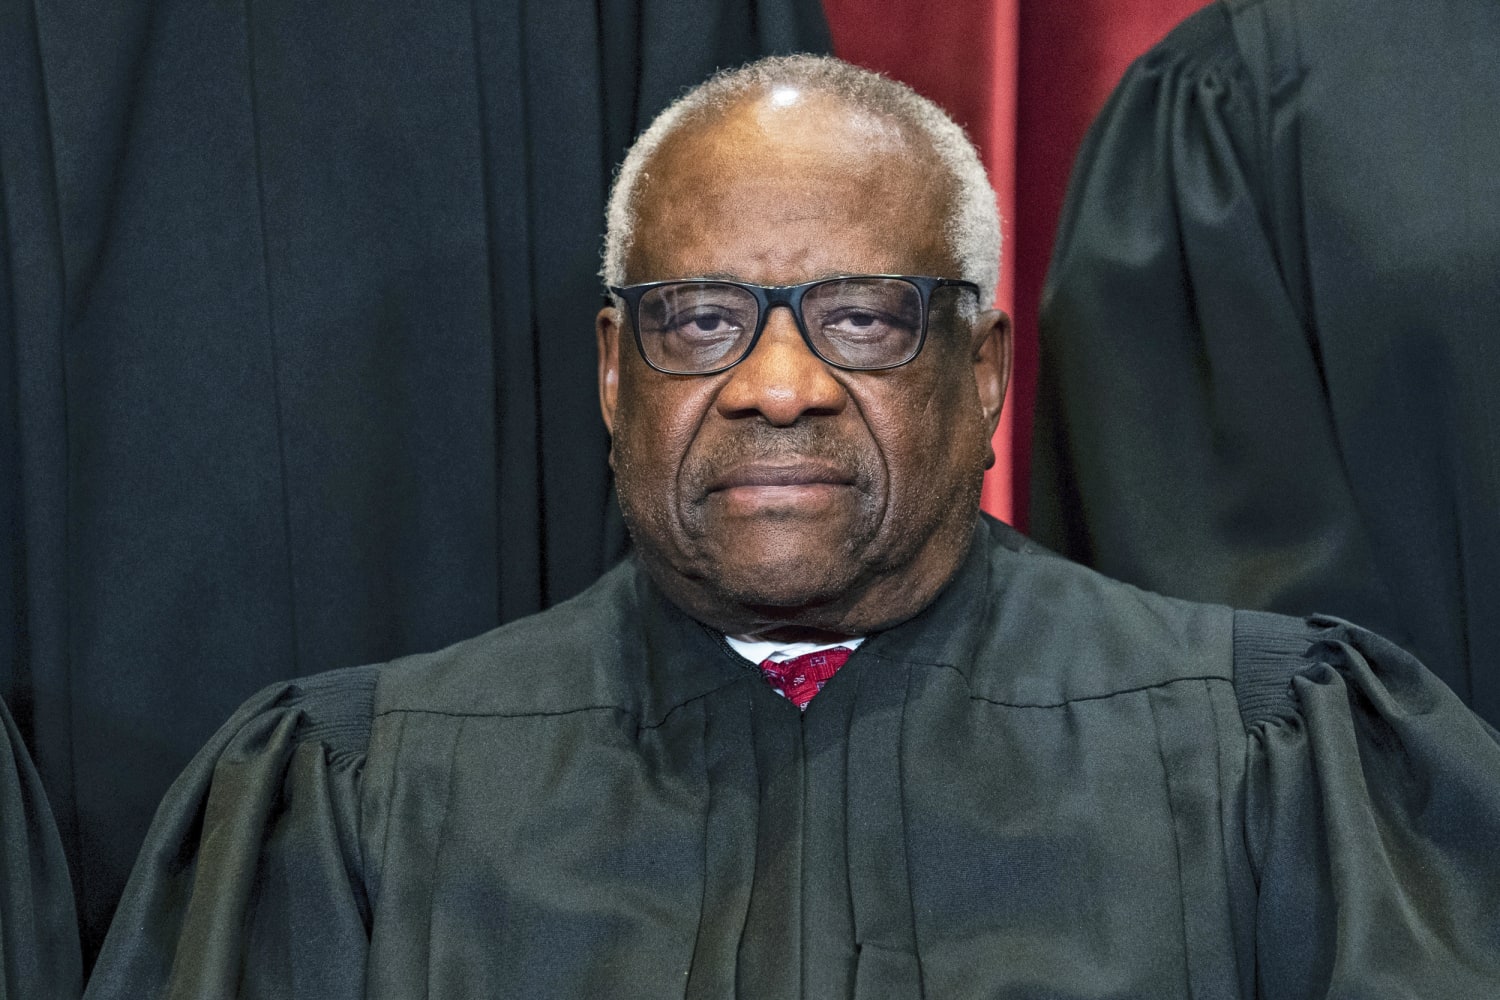 Justice Thomas cites debunked claim that Covid vaccines are made with cells from ‘aborted children’